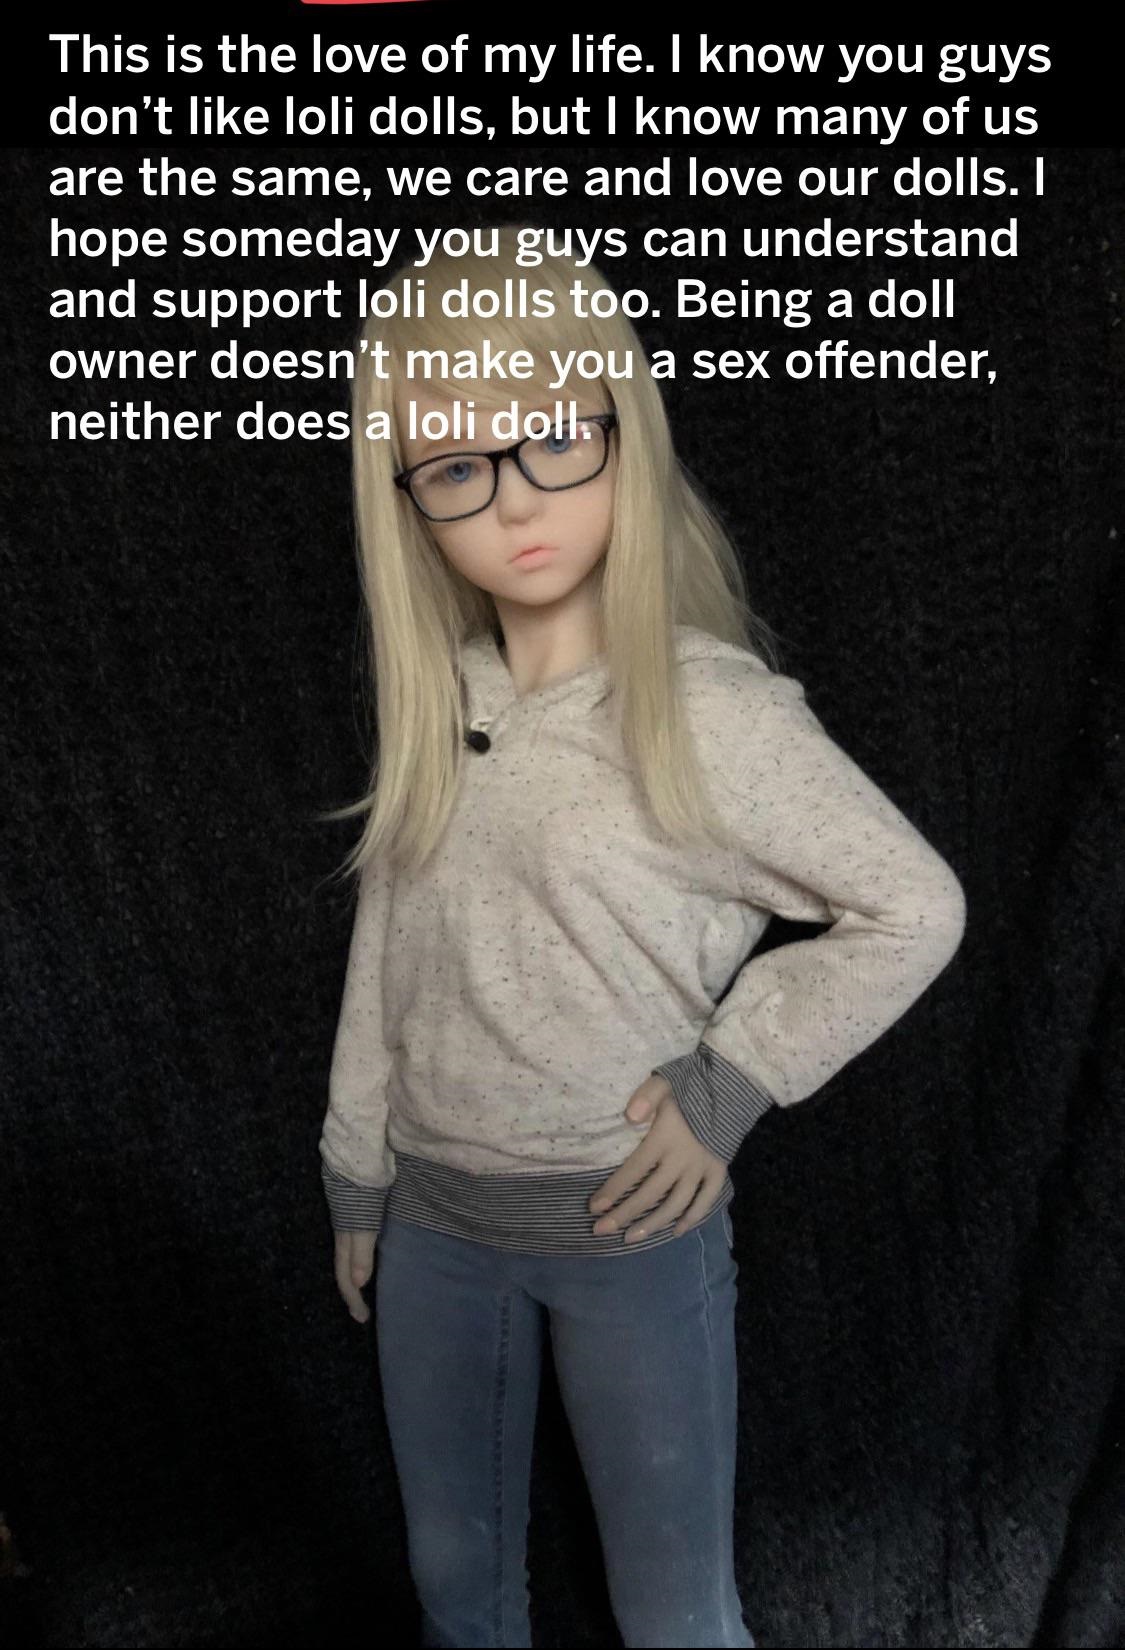 glasses - This is the love of my life. I know you guys don't loli dolls, but I know many of us are the same, we care and love our dolls. I hope someday you guys can understand and support loli dolls too. Being a doll owner doesn't make you a sex offender,